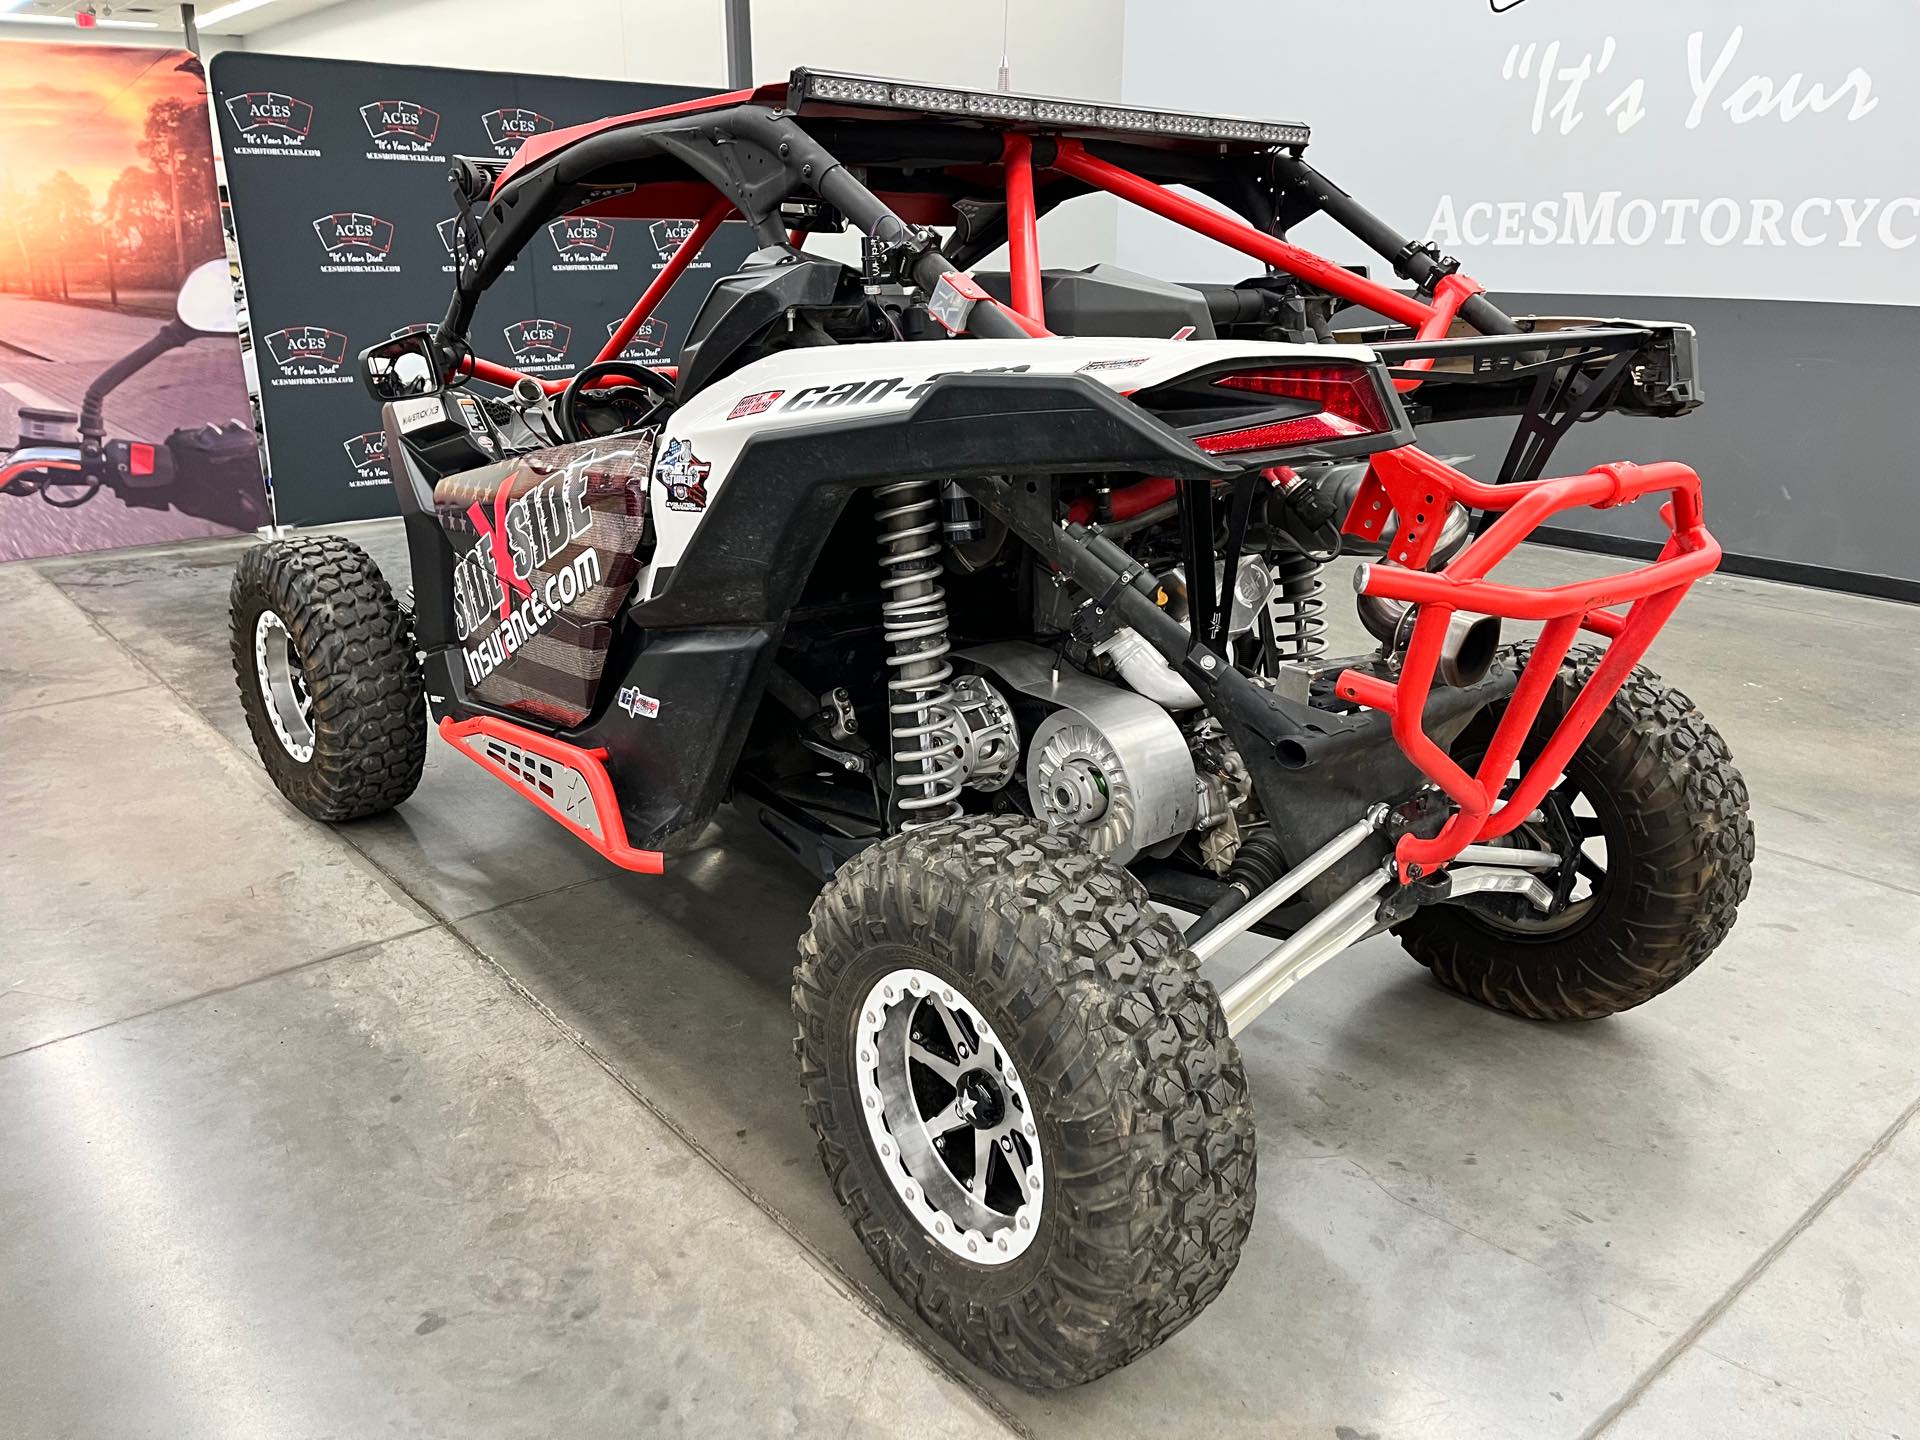 2017 Can-Am Maverick X3 TURBO R at Aces Motorcycles - Denver